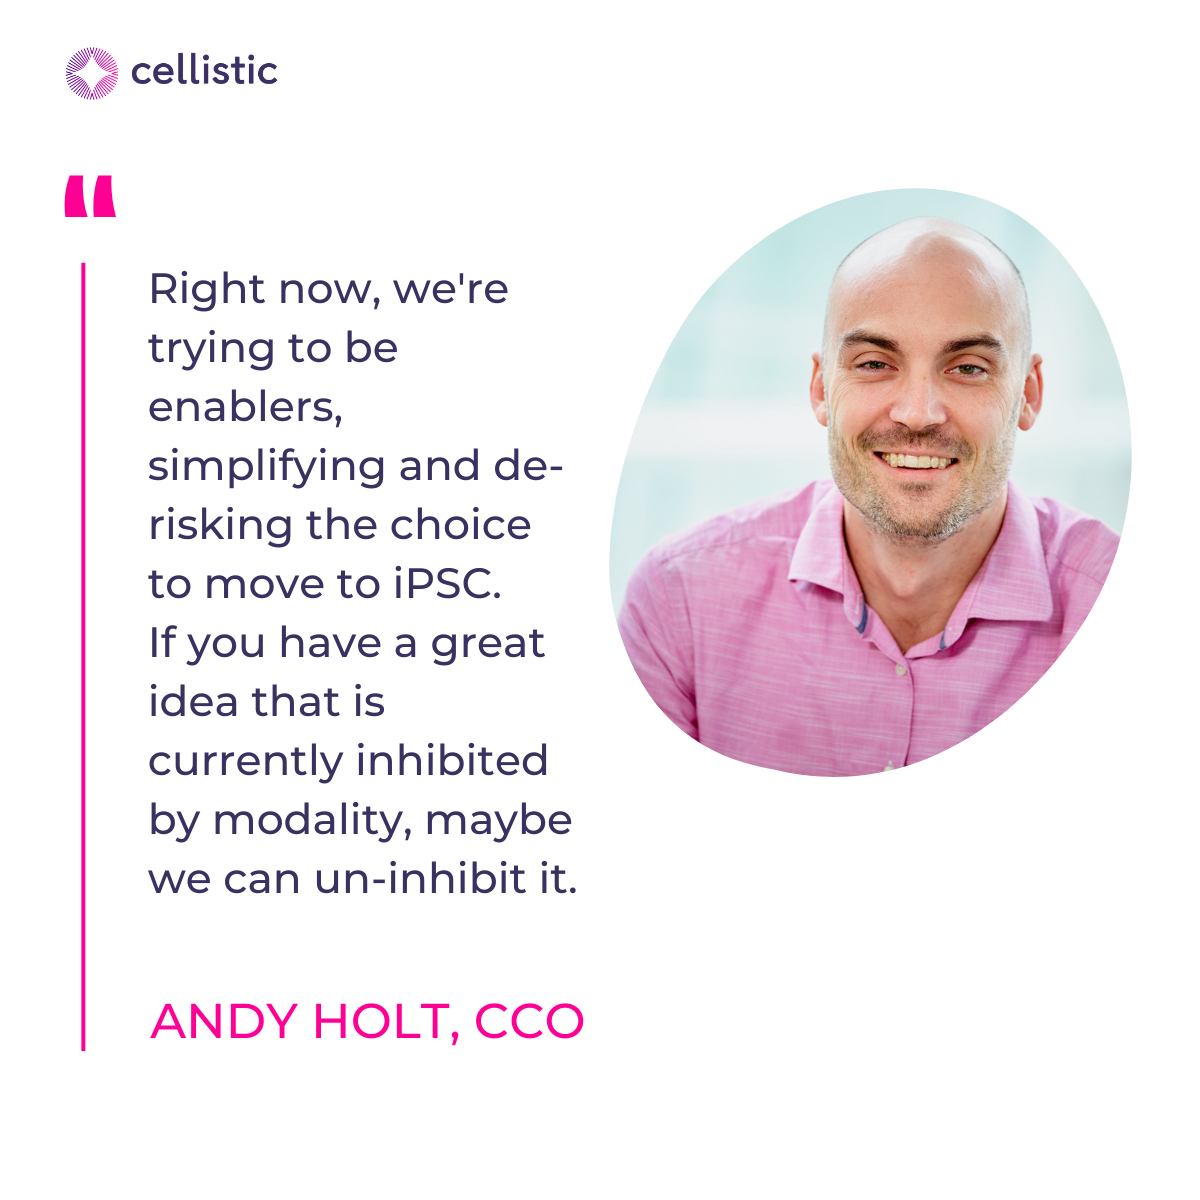 The value of capability in allogeneic cell therapy: an interview with Andy Holt